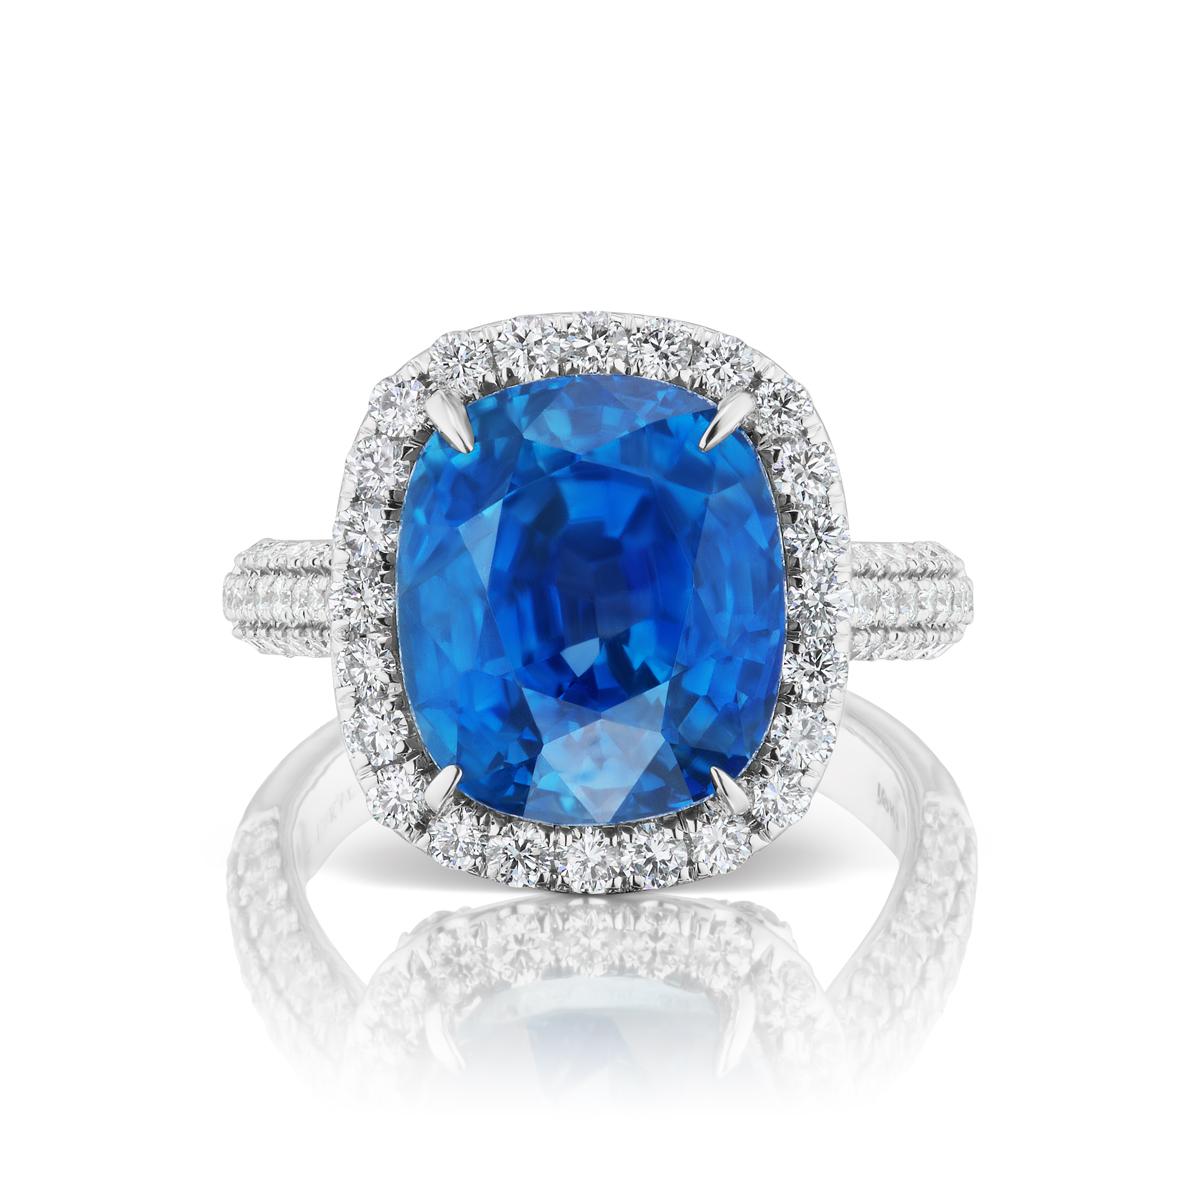 UNHEATED BURMA BLUE SAPPHIRE RING WITH DIAMONDS
An exquisite snowy diamond halo surrounds a clear blue sapphire.Sapphire is Burmese & UN-Heated with AGL and GRS Certificate.
Item:	# 03398
Setting:	18K W
Lab:	GRS & AGL
Color Weight:	12.57 ct. of